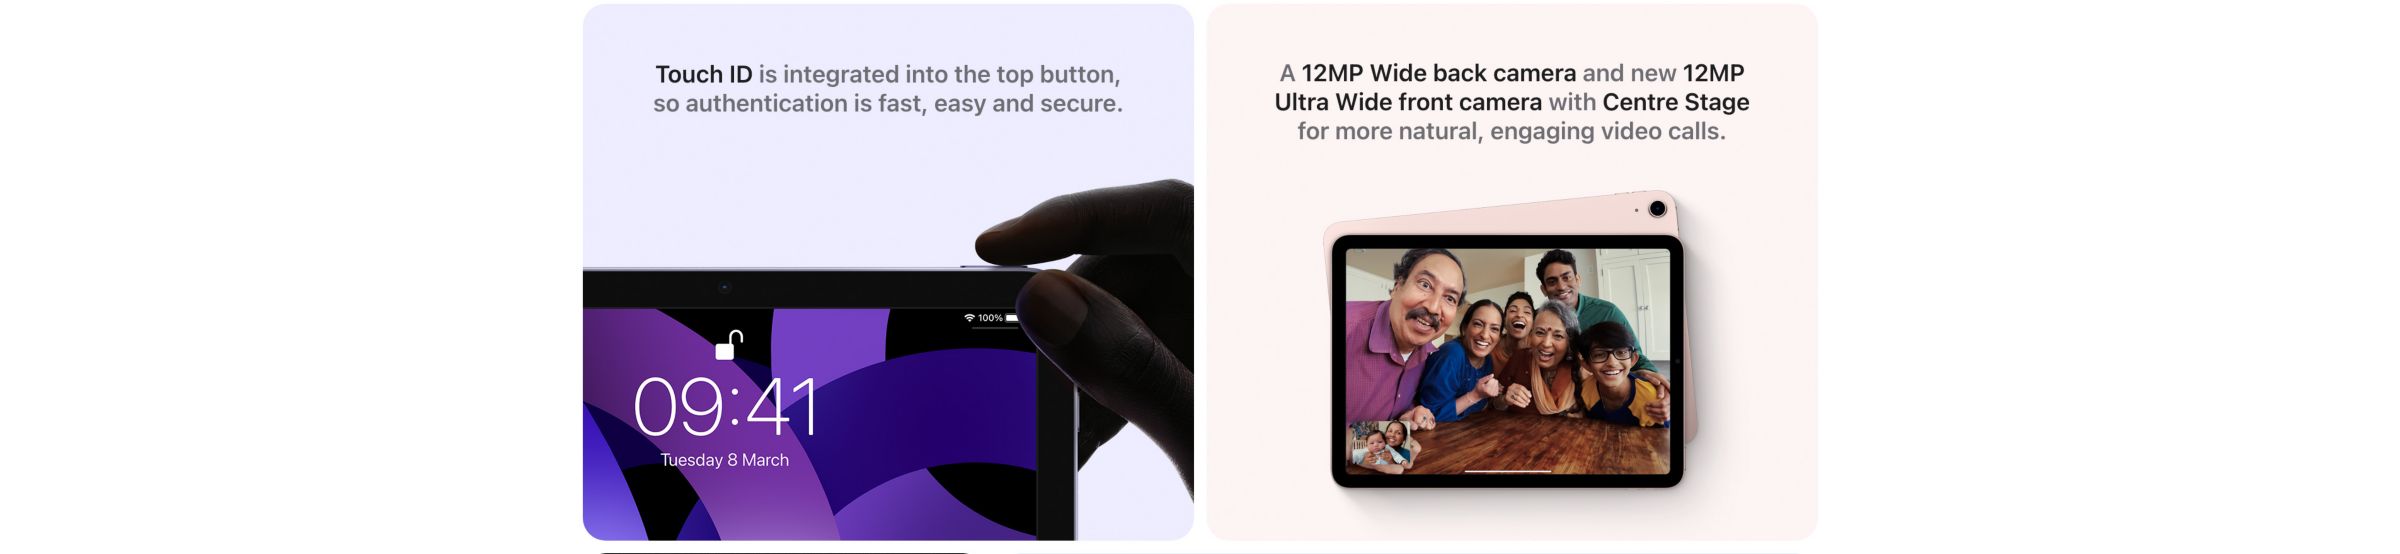 Touch ID is integrated into the top button, so authentication is fast, easy and secure.